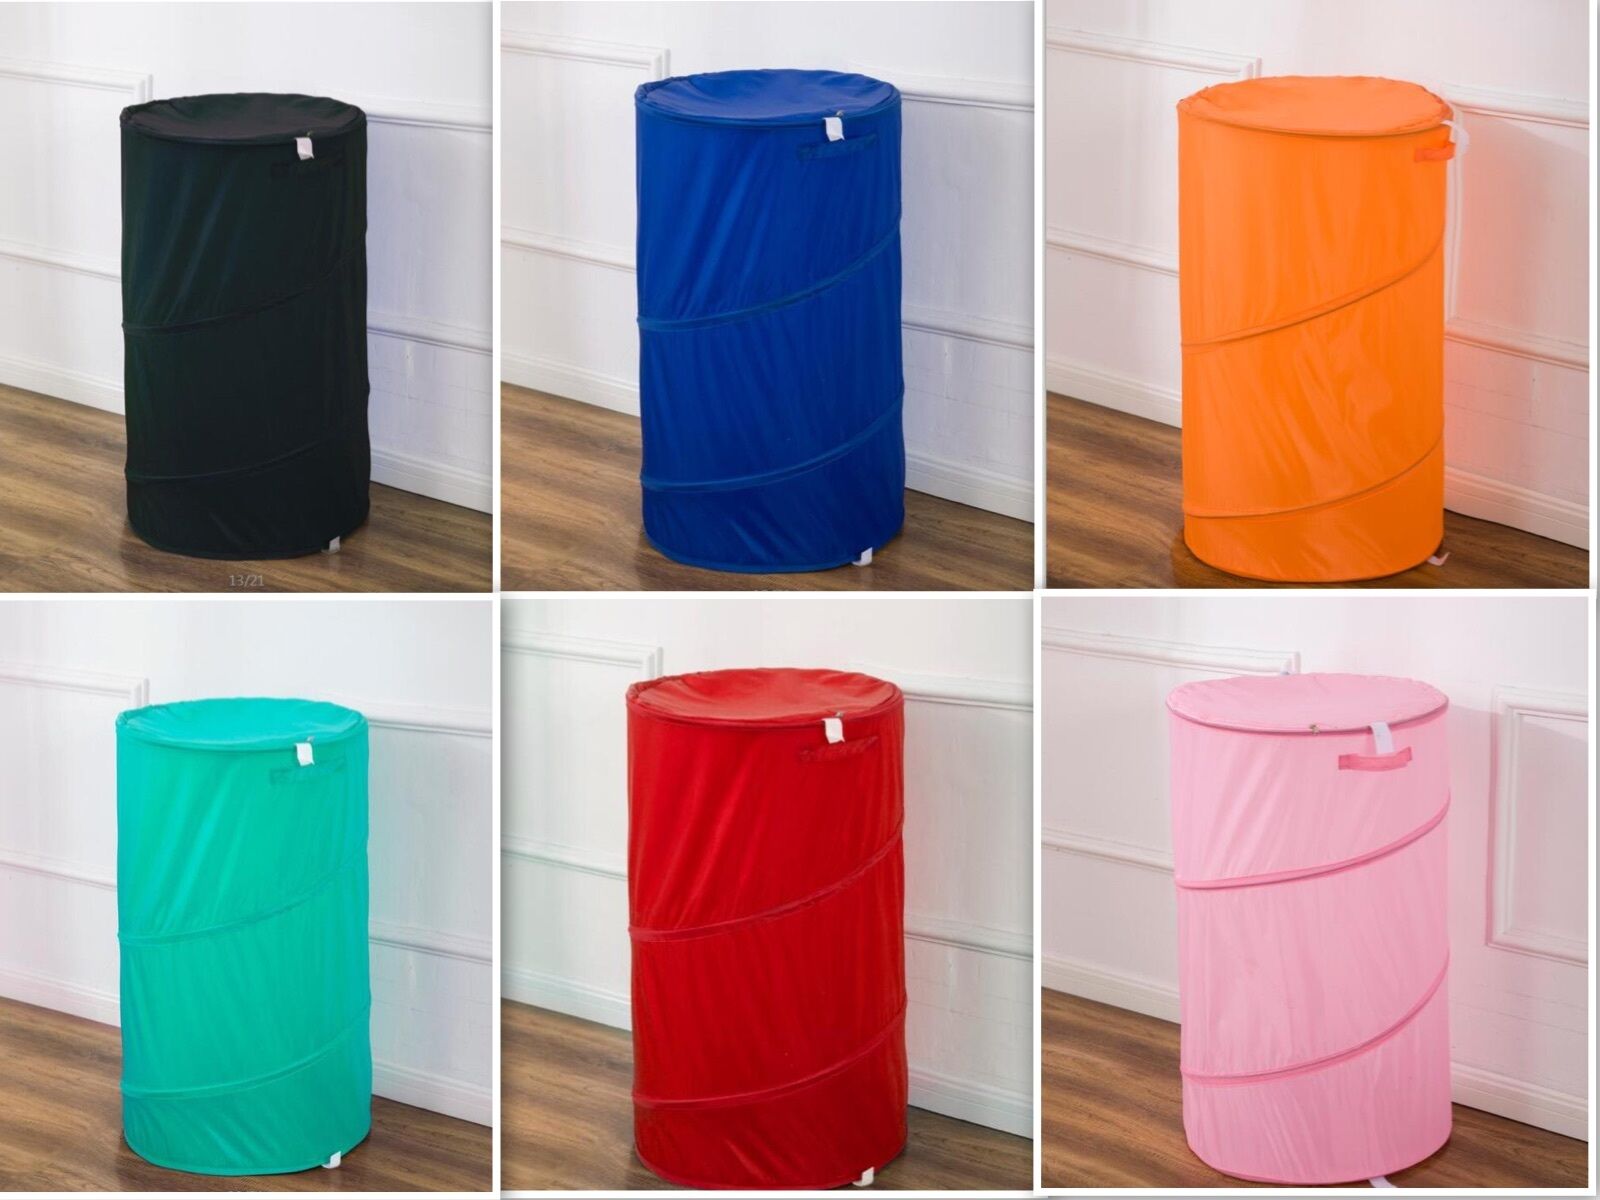 Durable Pop Up Laundry Basket Wire Hamper With Zipper Close Overstock Sale !!!